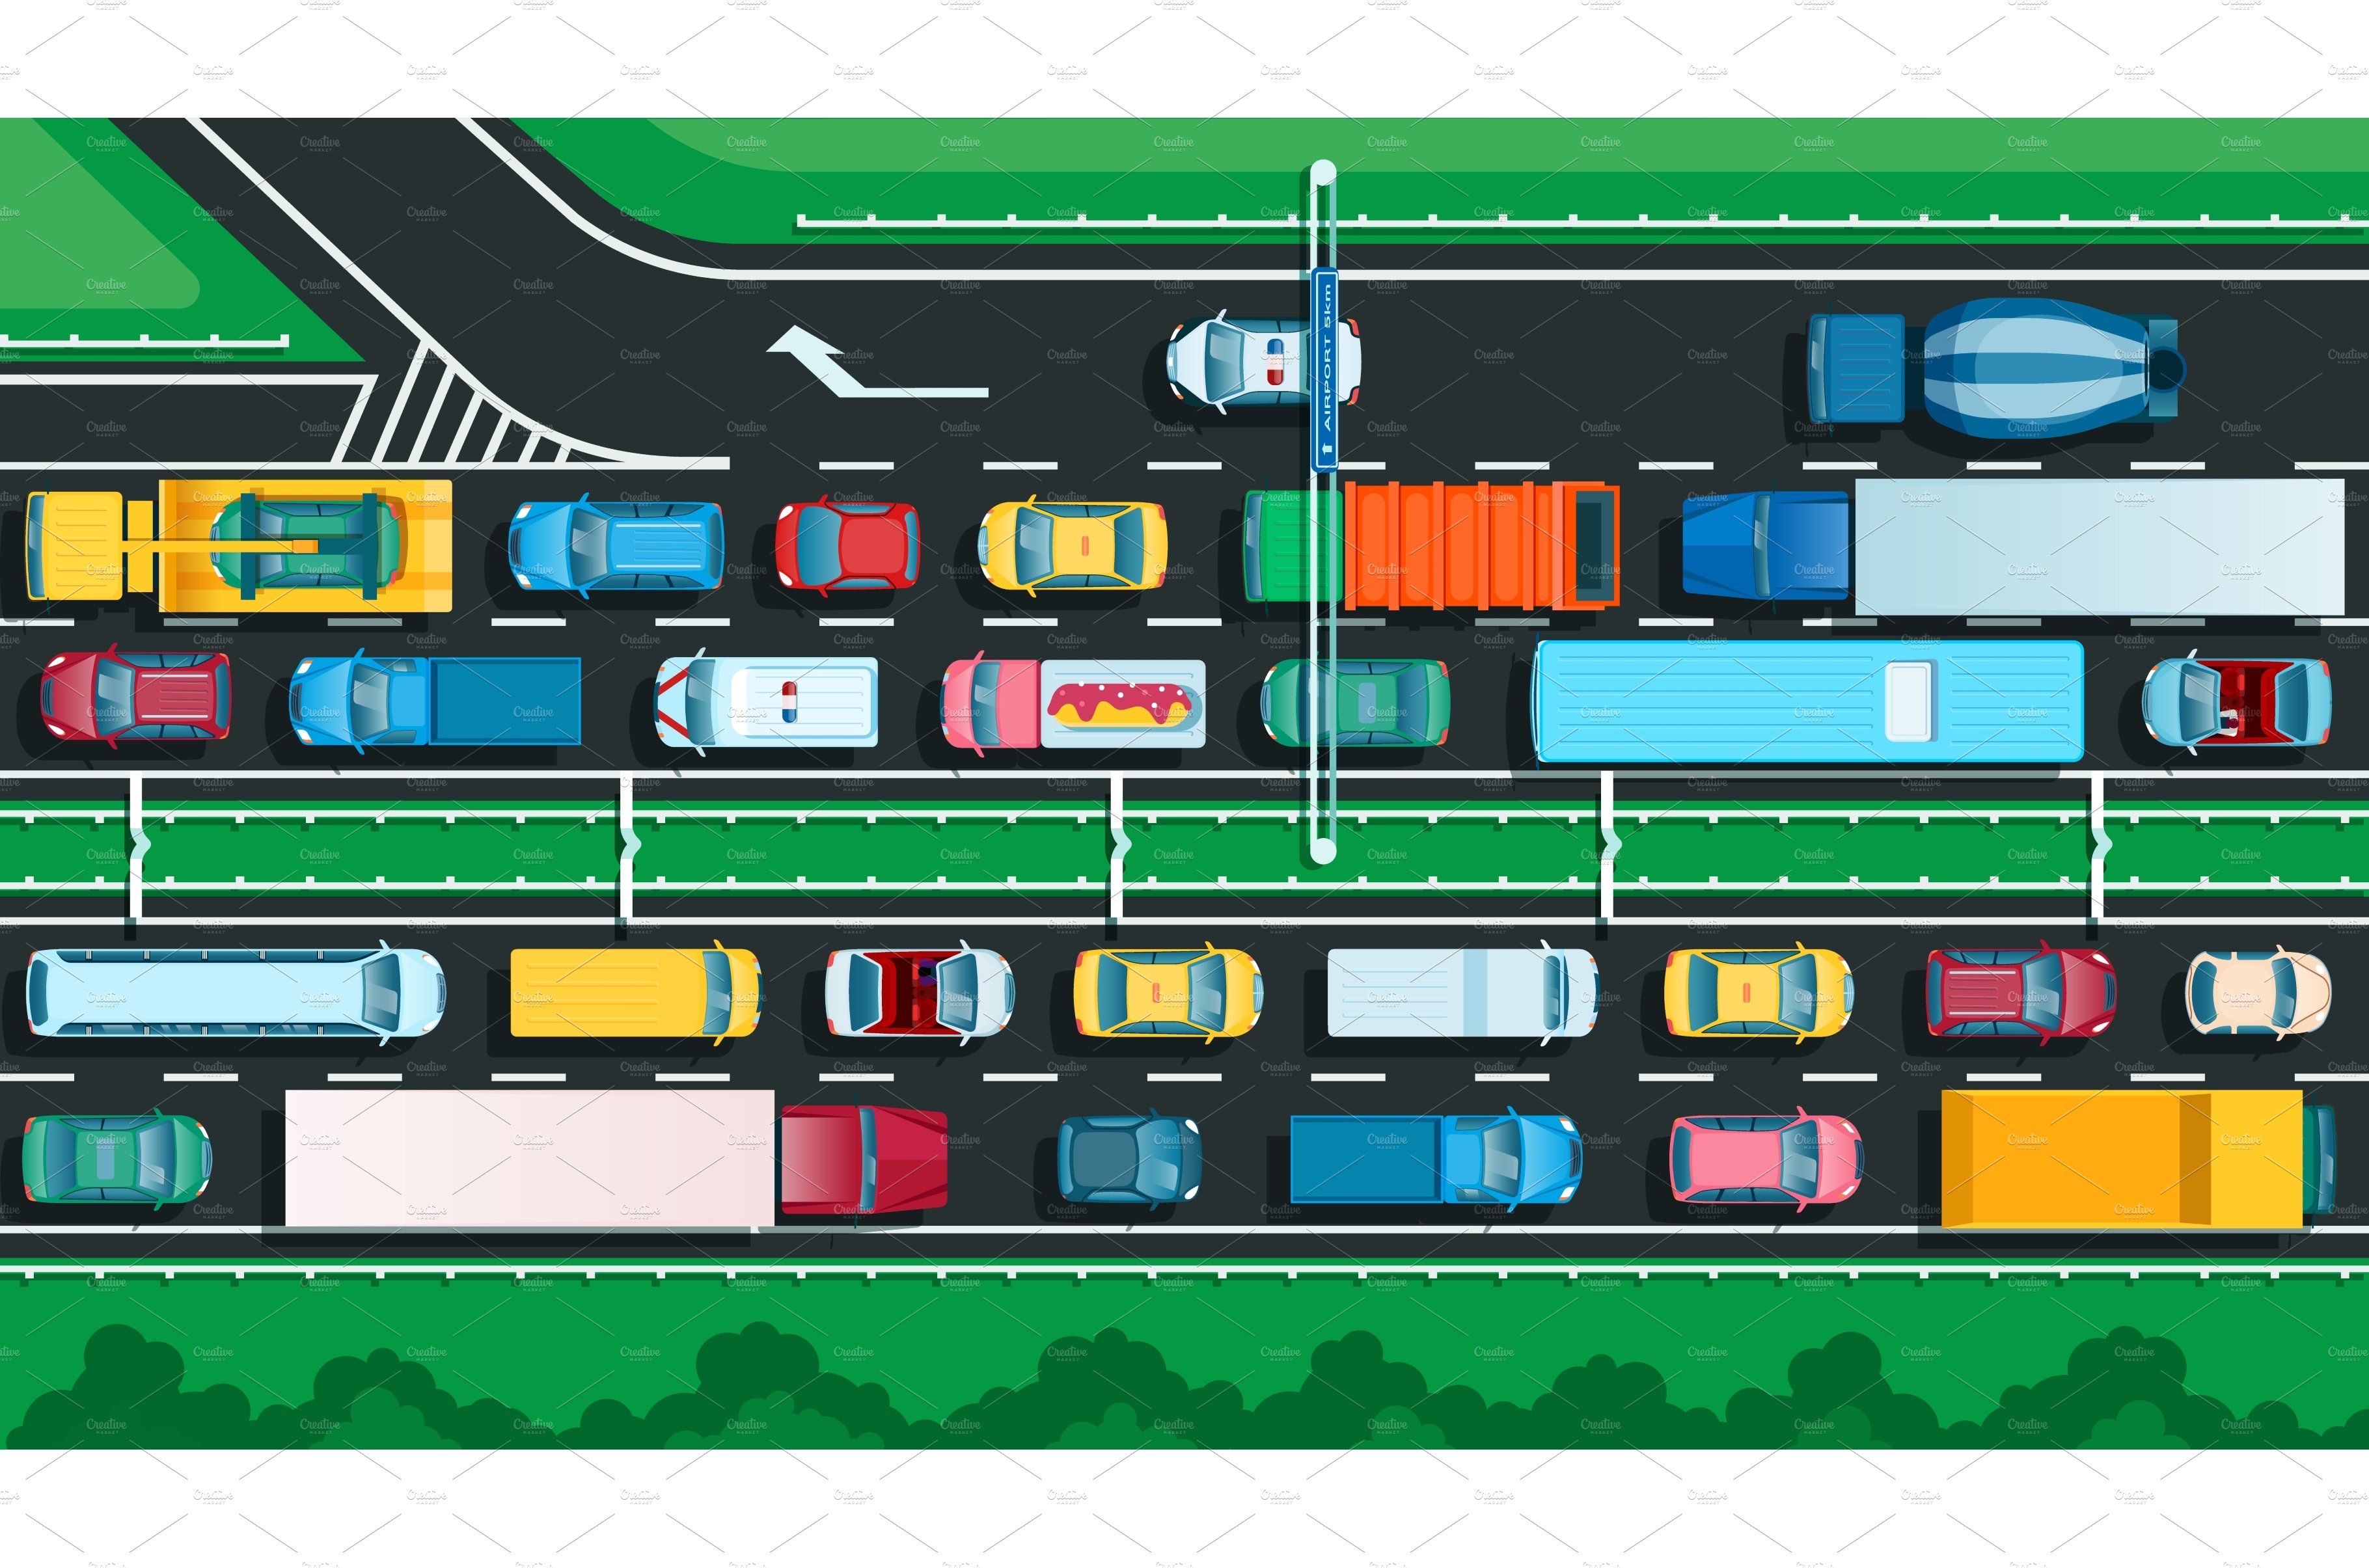 Top view highway with traffic jam cover image.